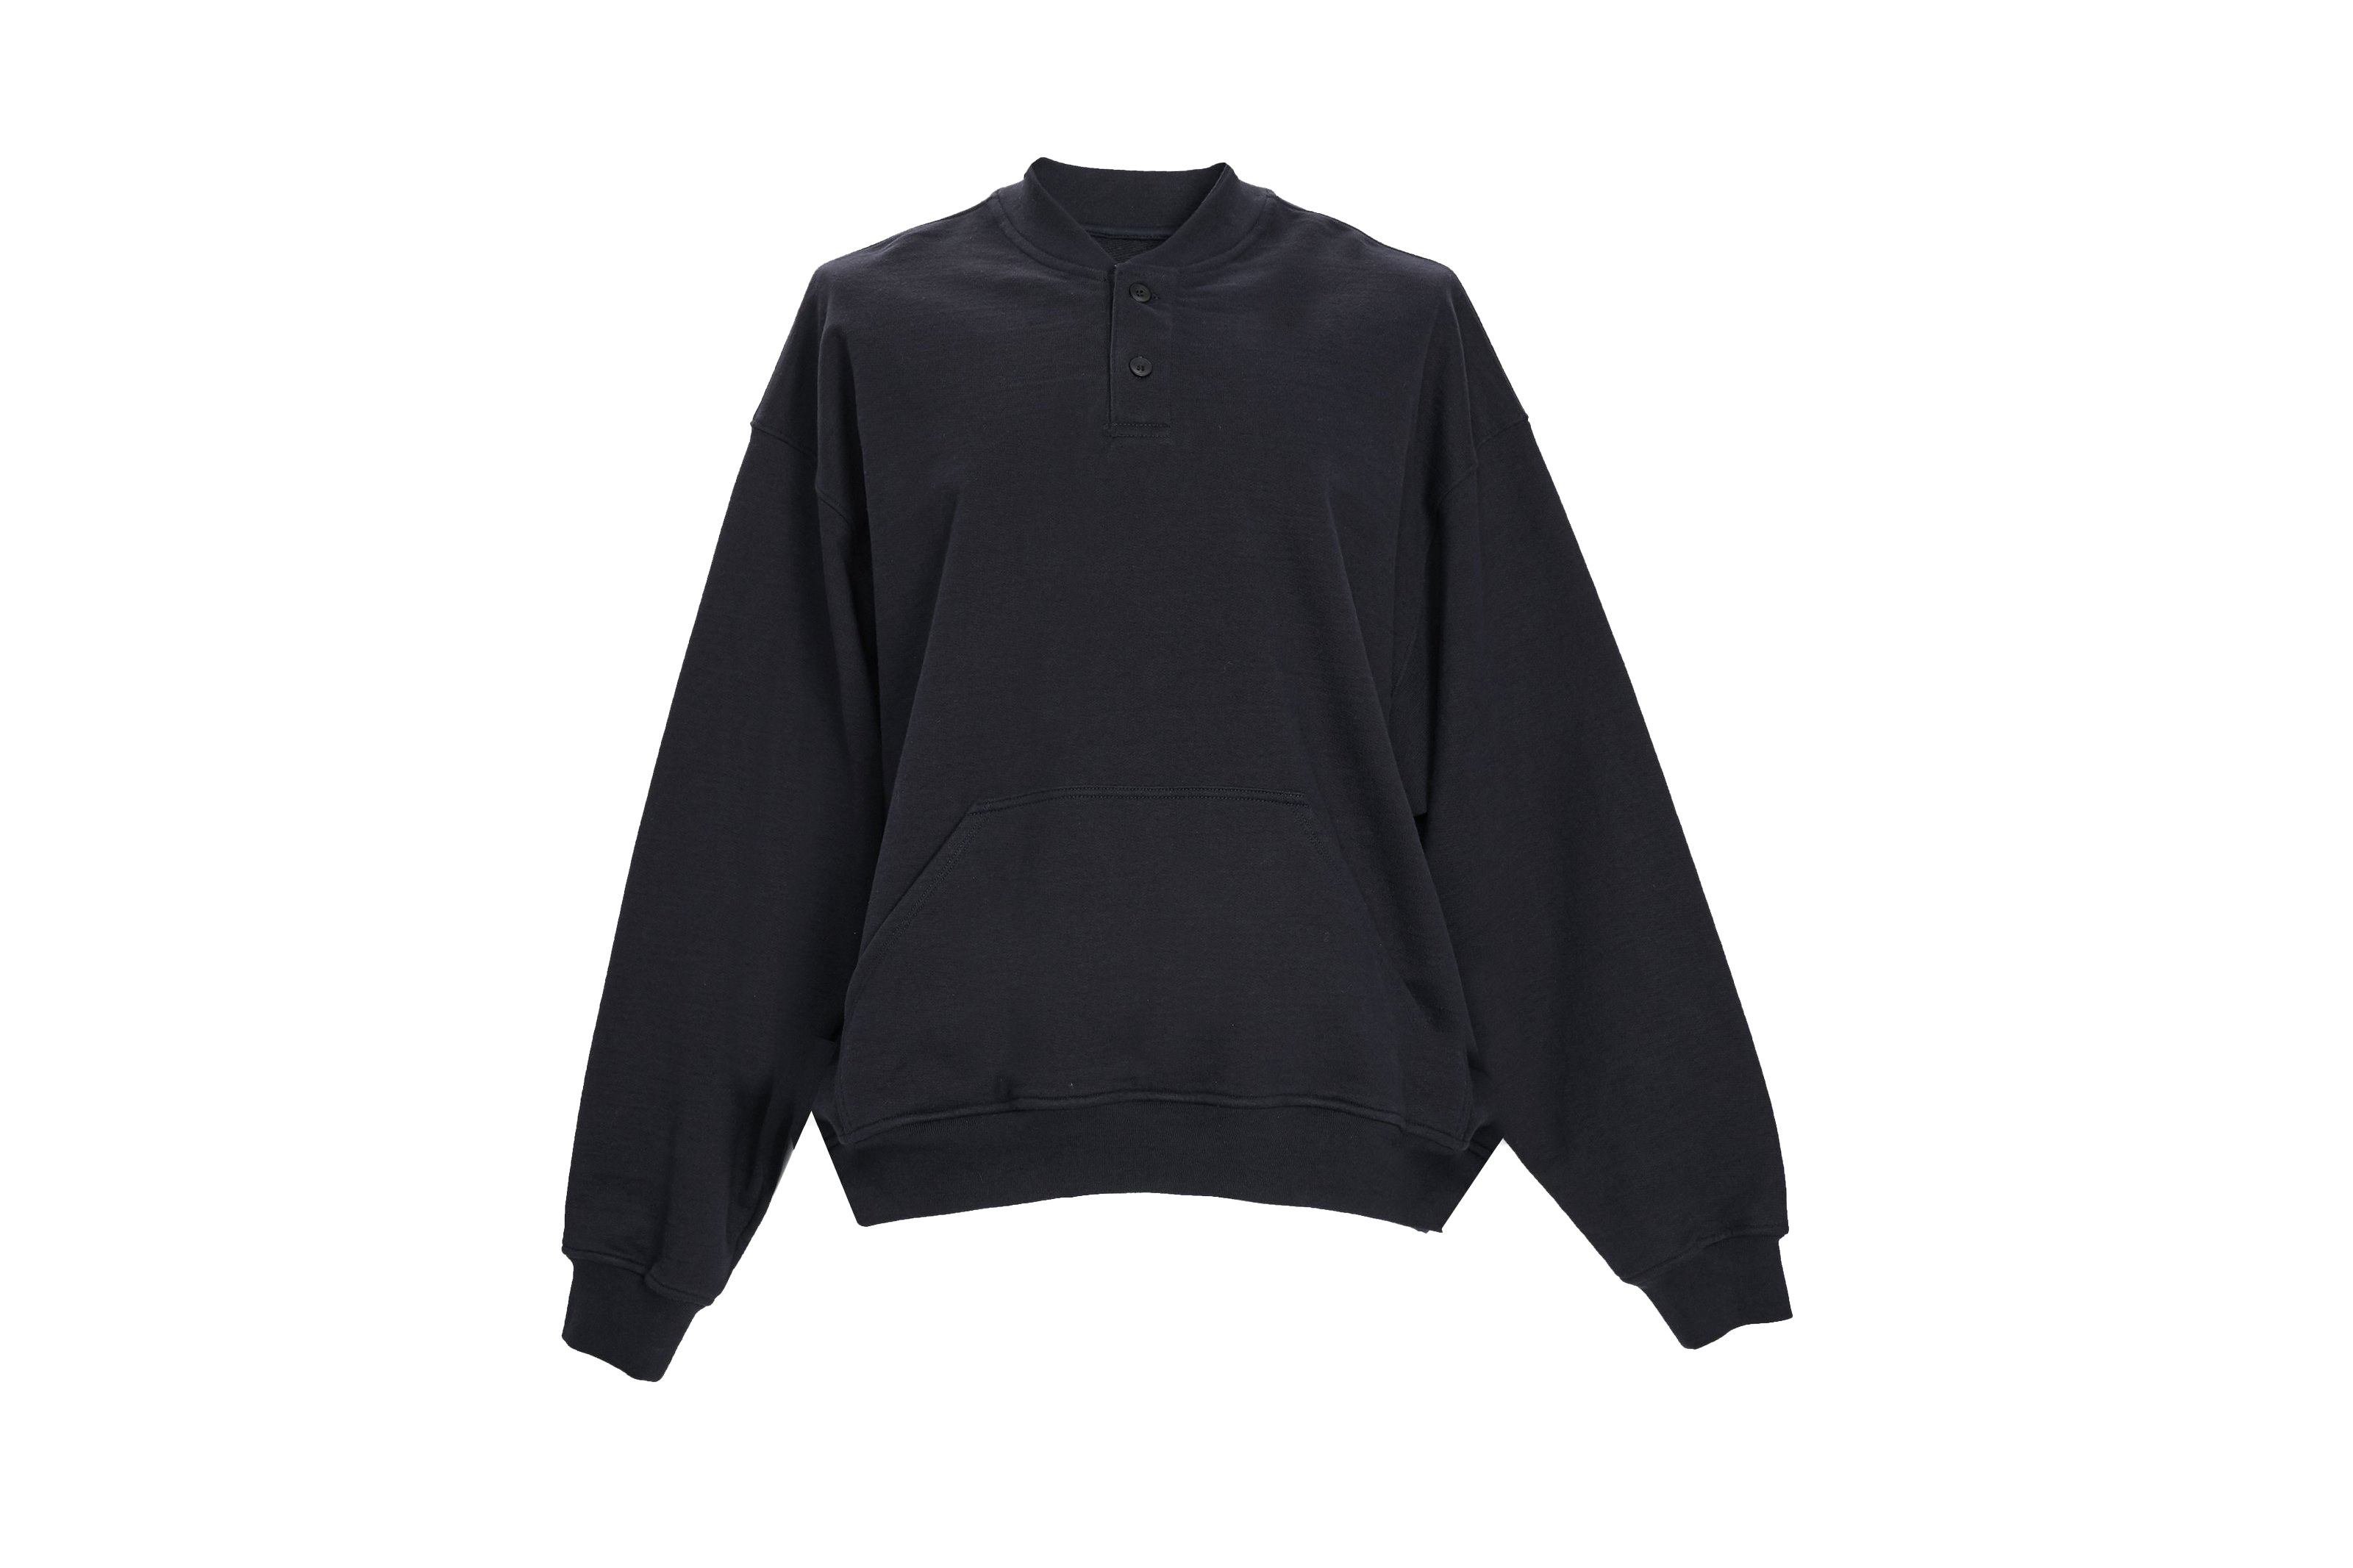 Fear of god everyday henley hoodieすみません